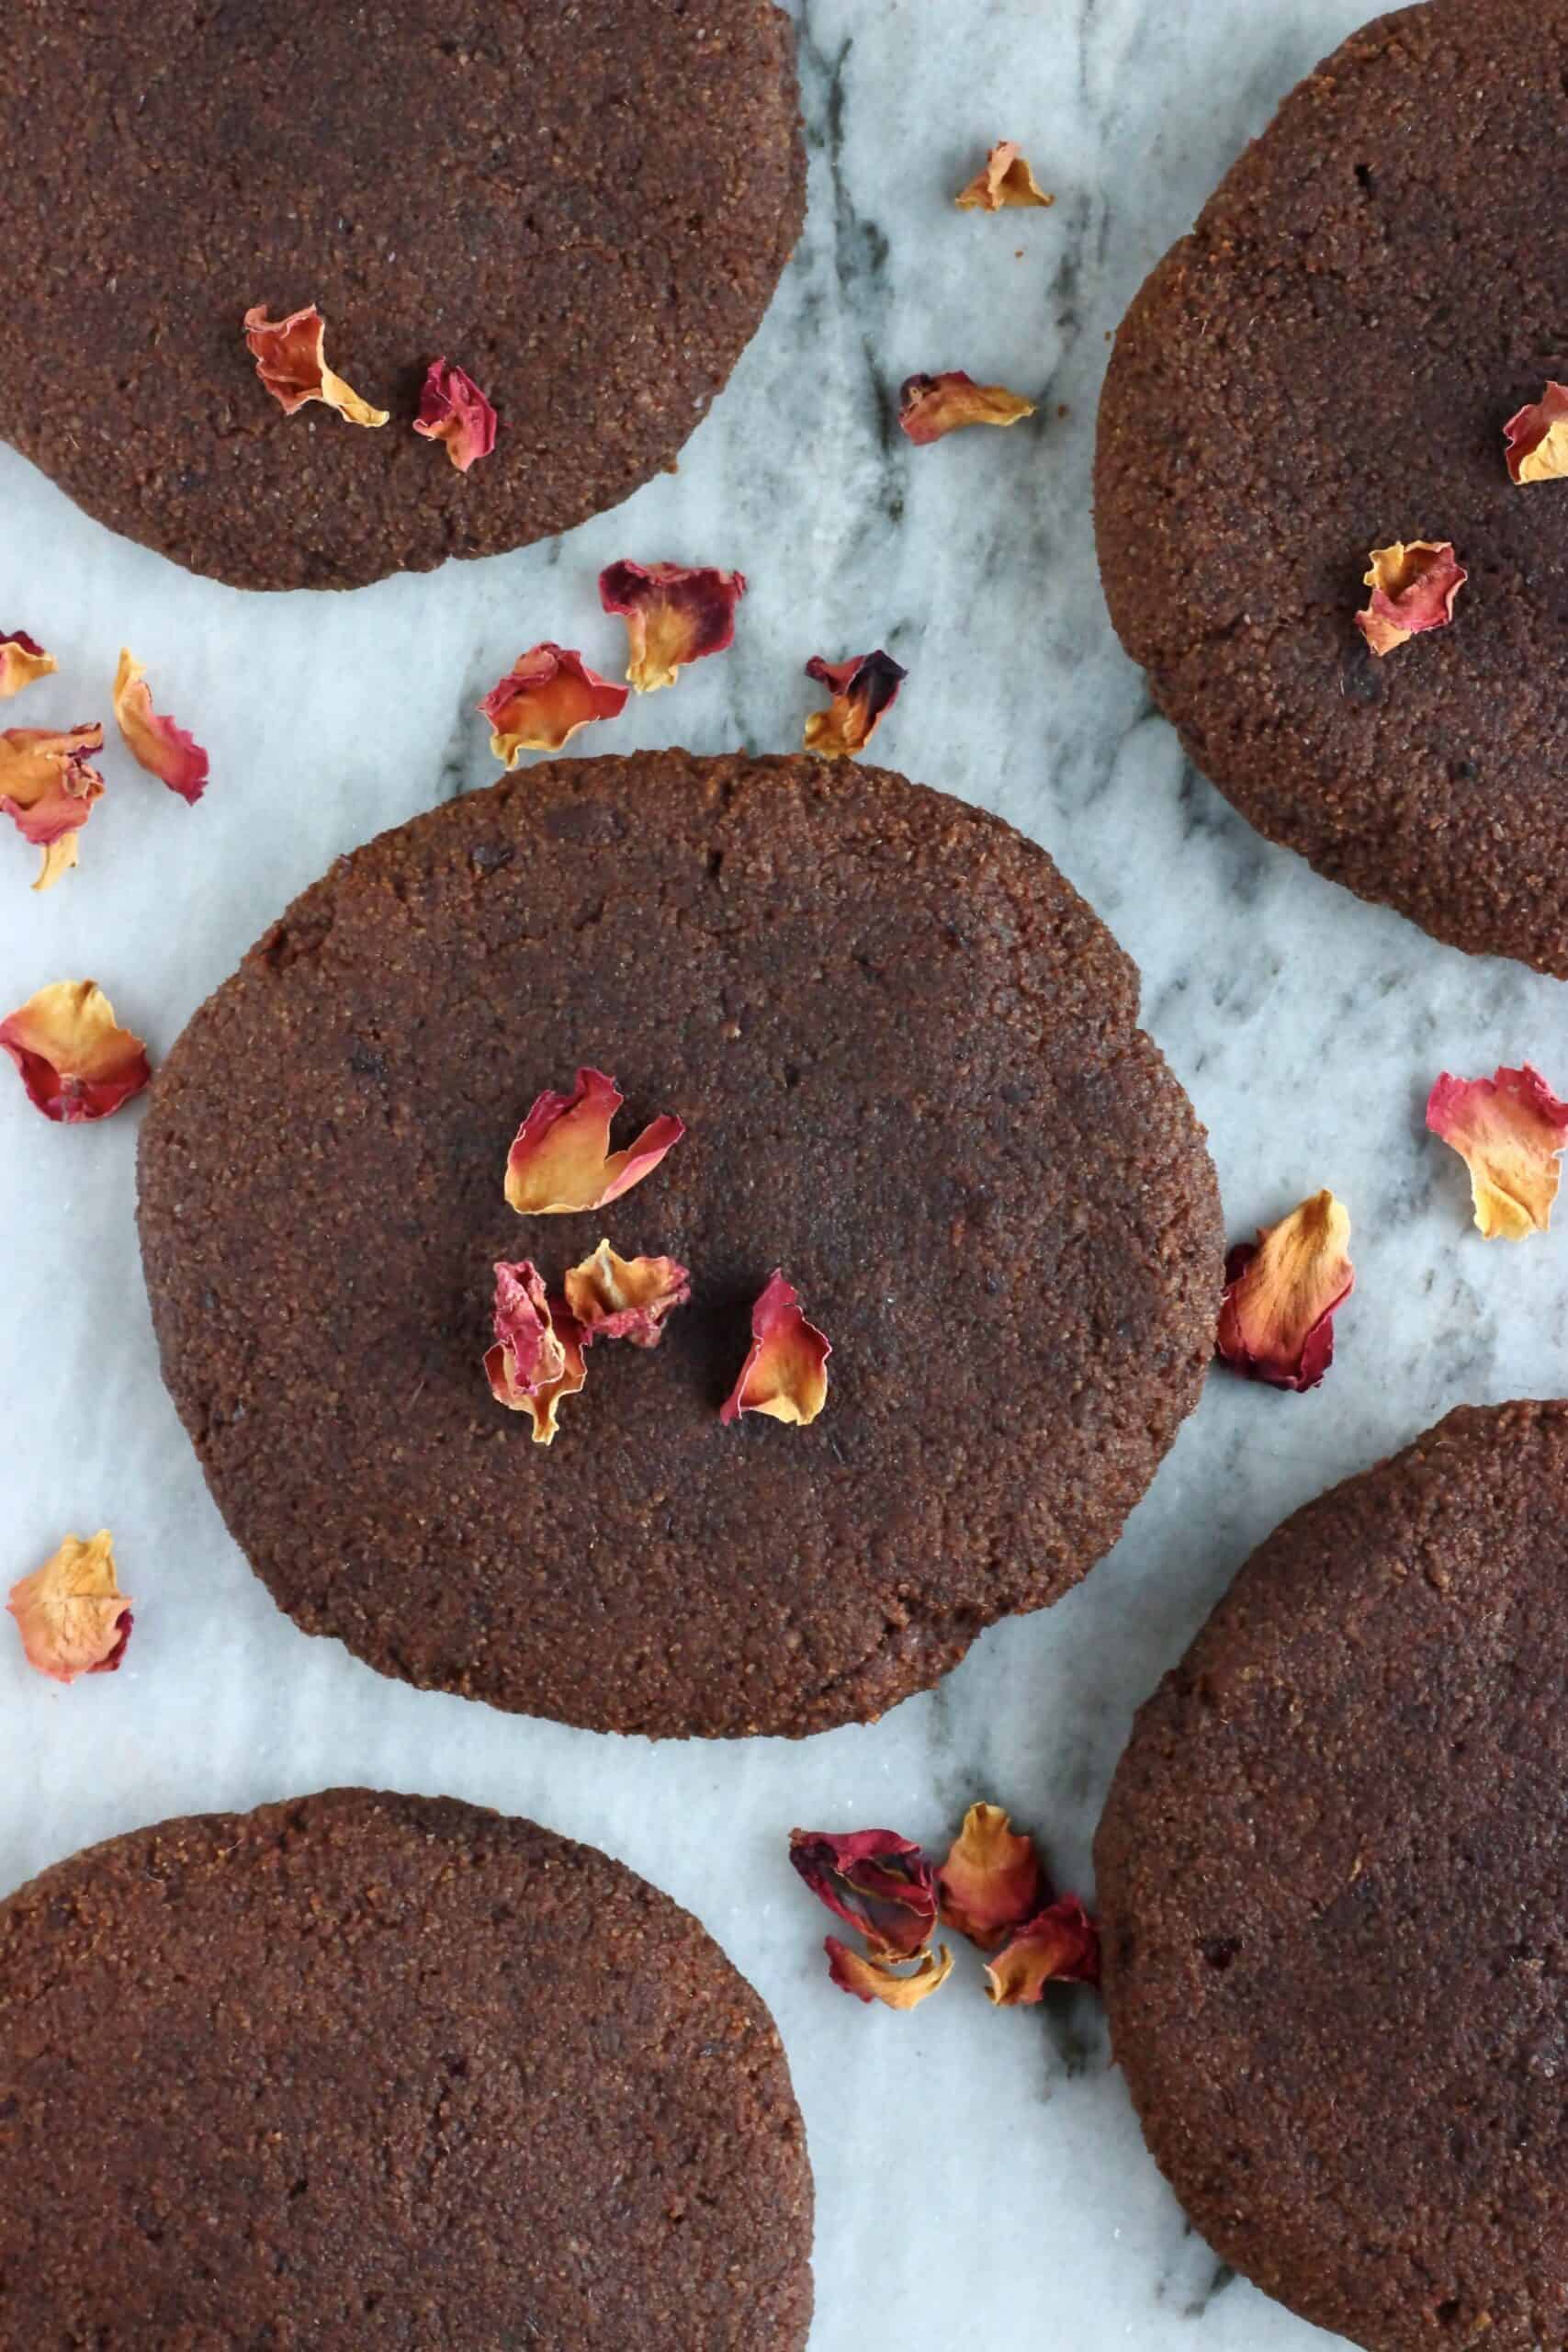 Five gluten-free vegan chocolate brownie cookies on a marble slab decorated with rose petals